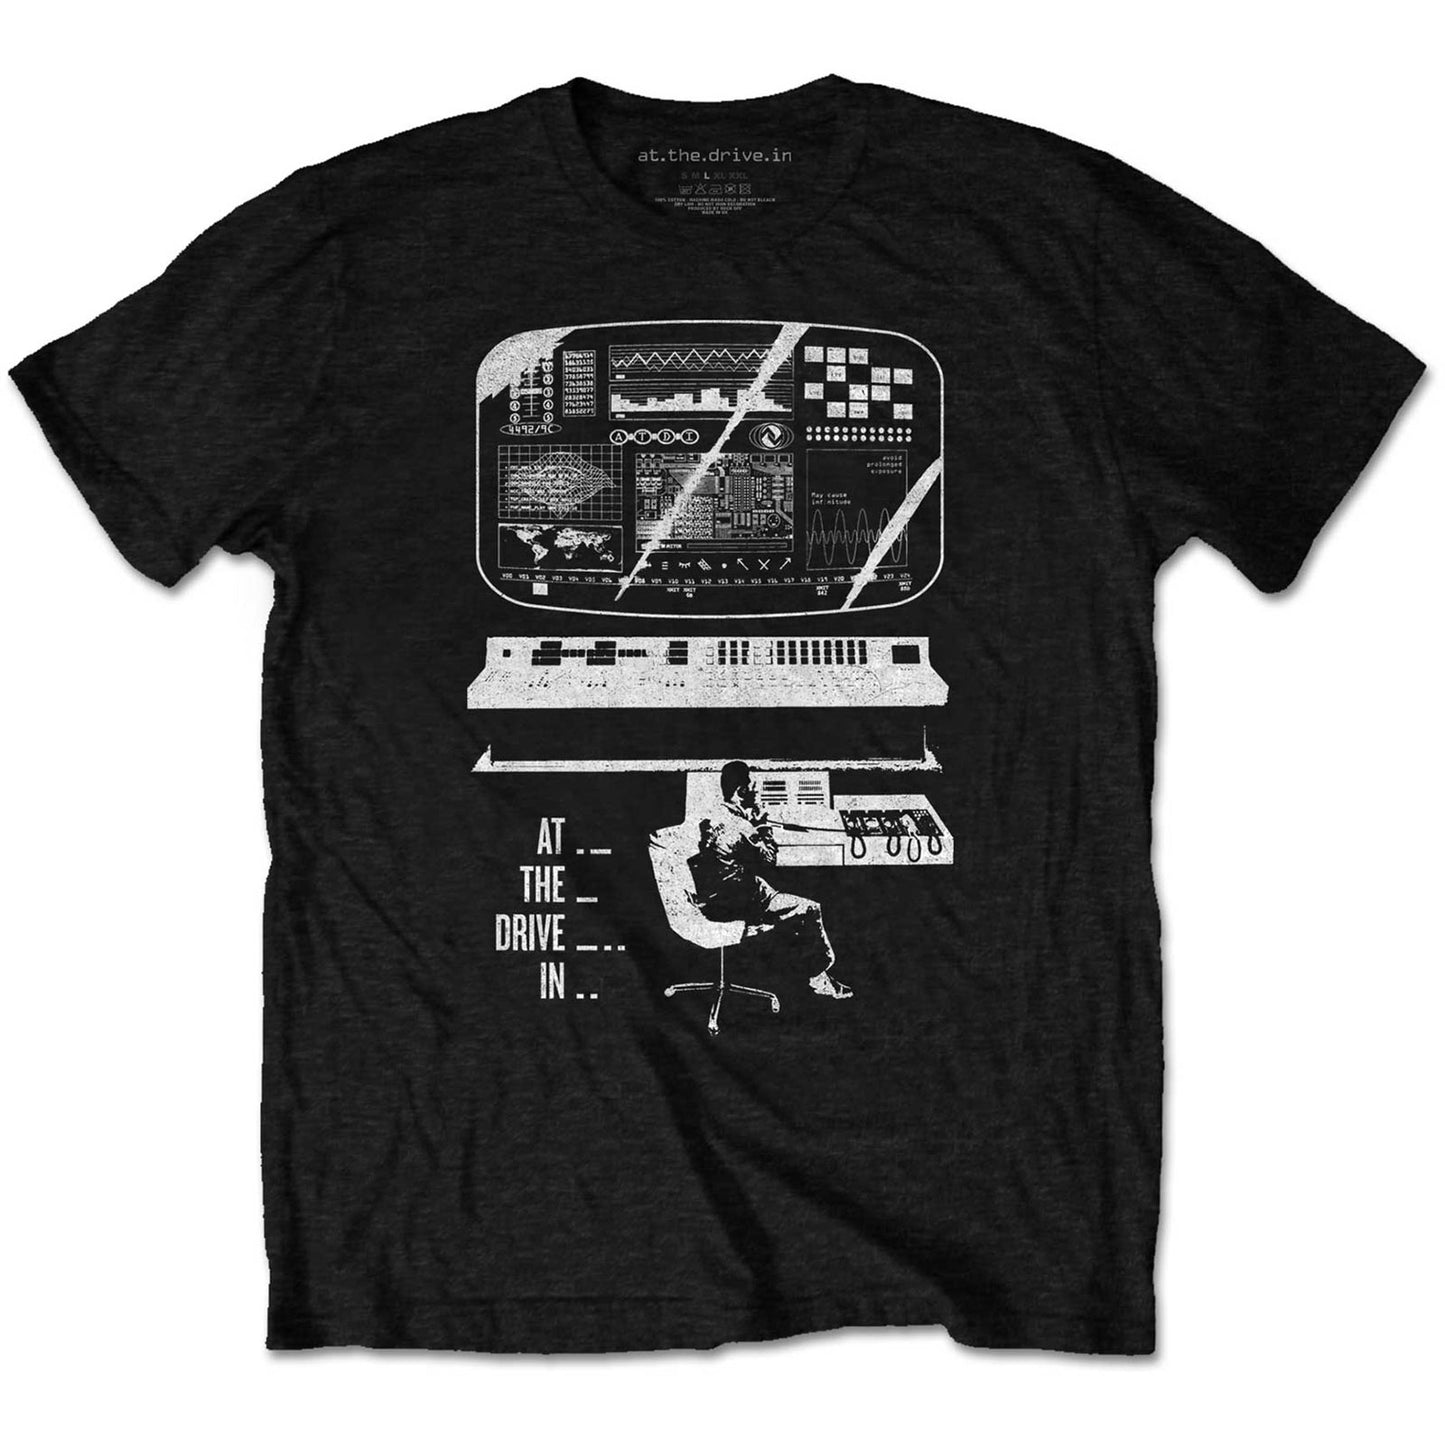 At The Drive-In T-Shirt: Monitor